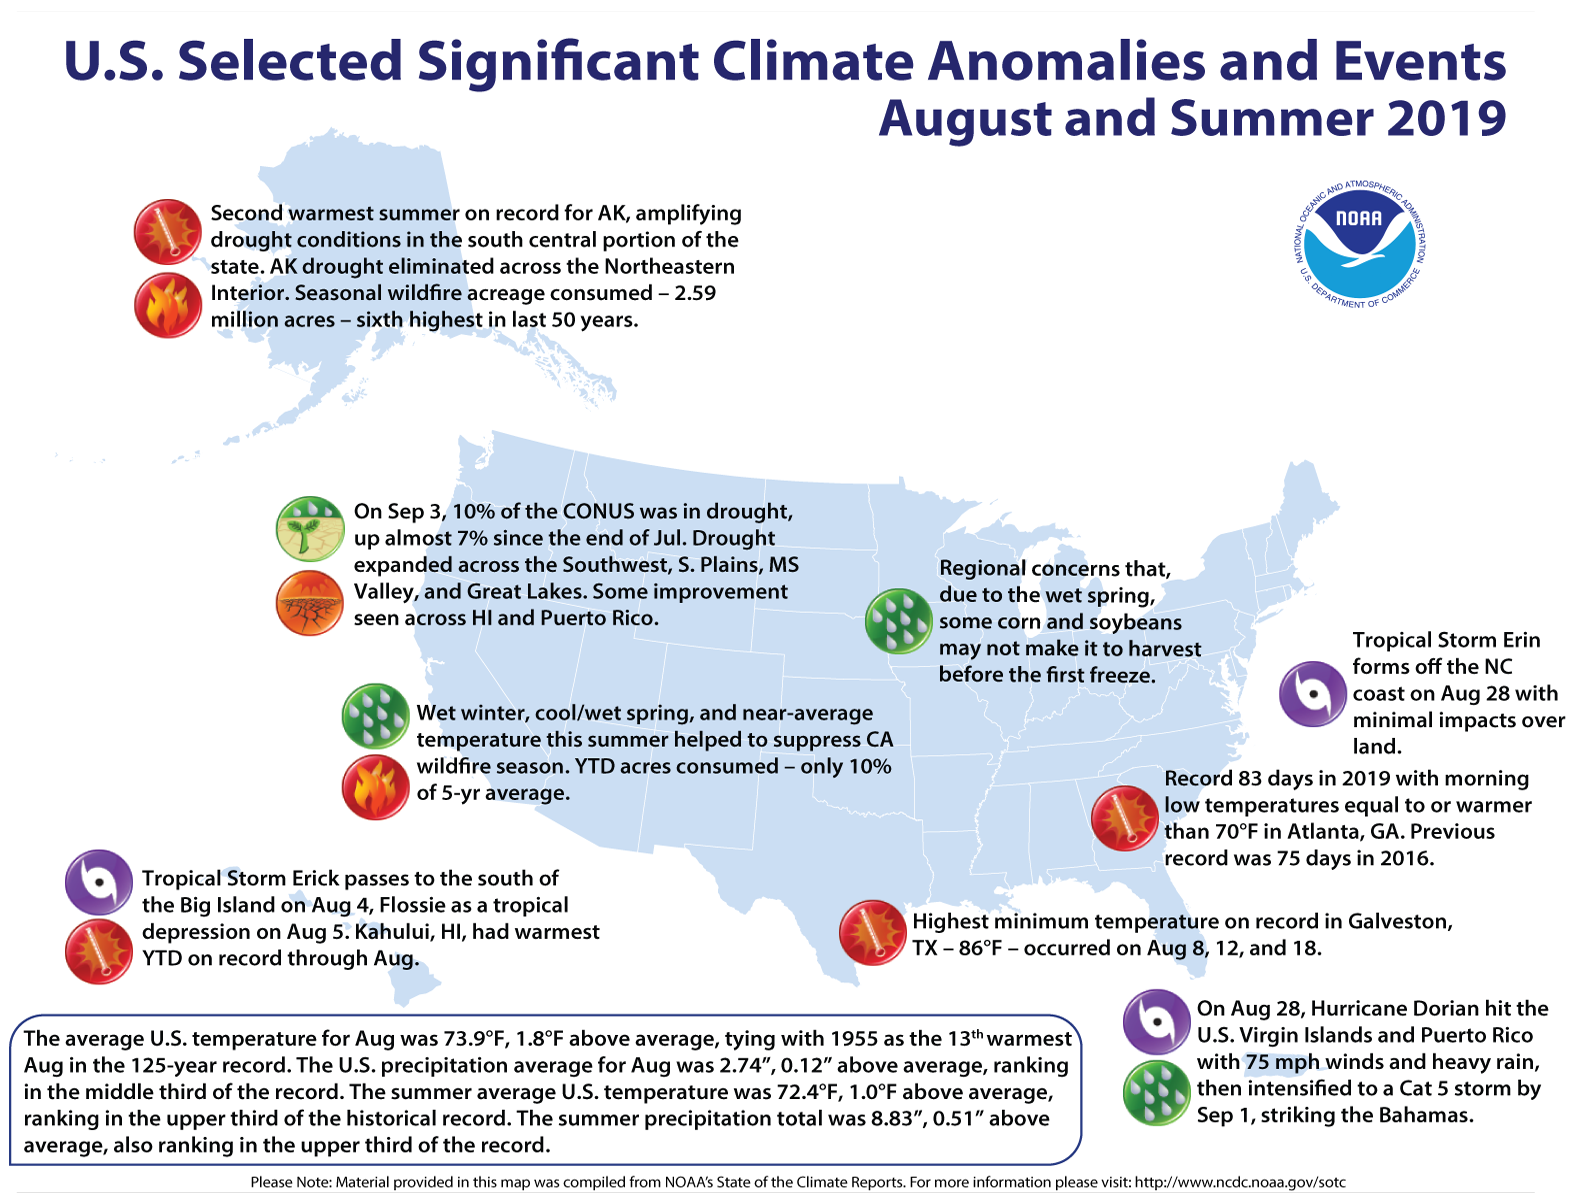 An annotated map of the United States showing notable climate events that occurred across the country during August 2019. 